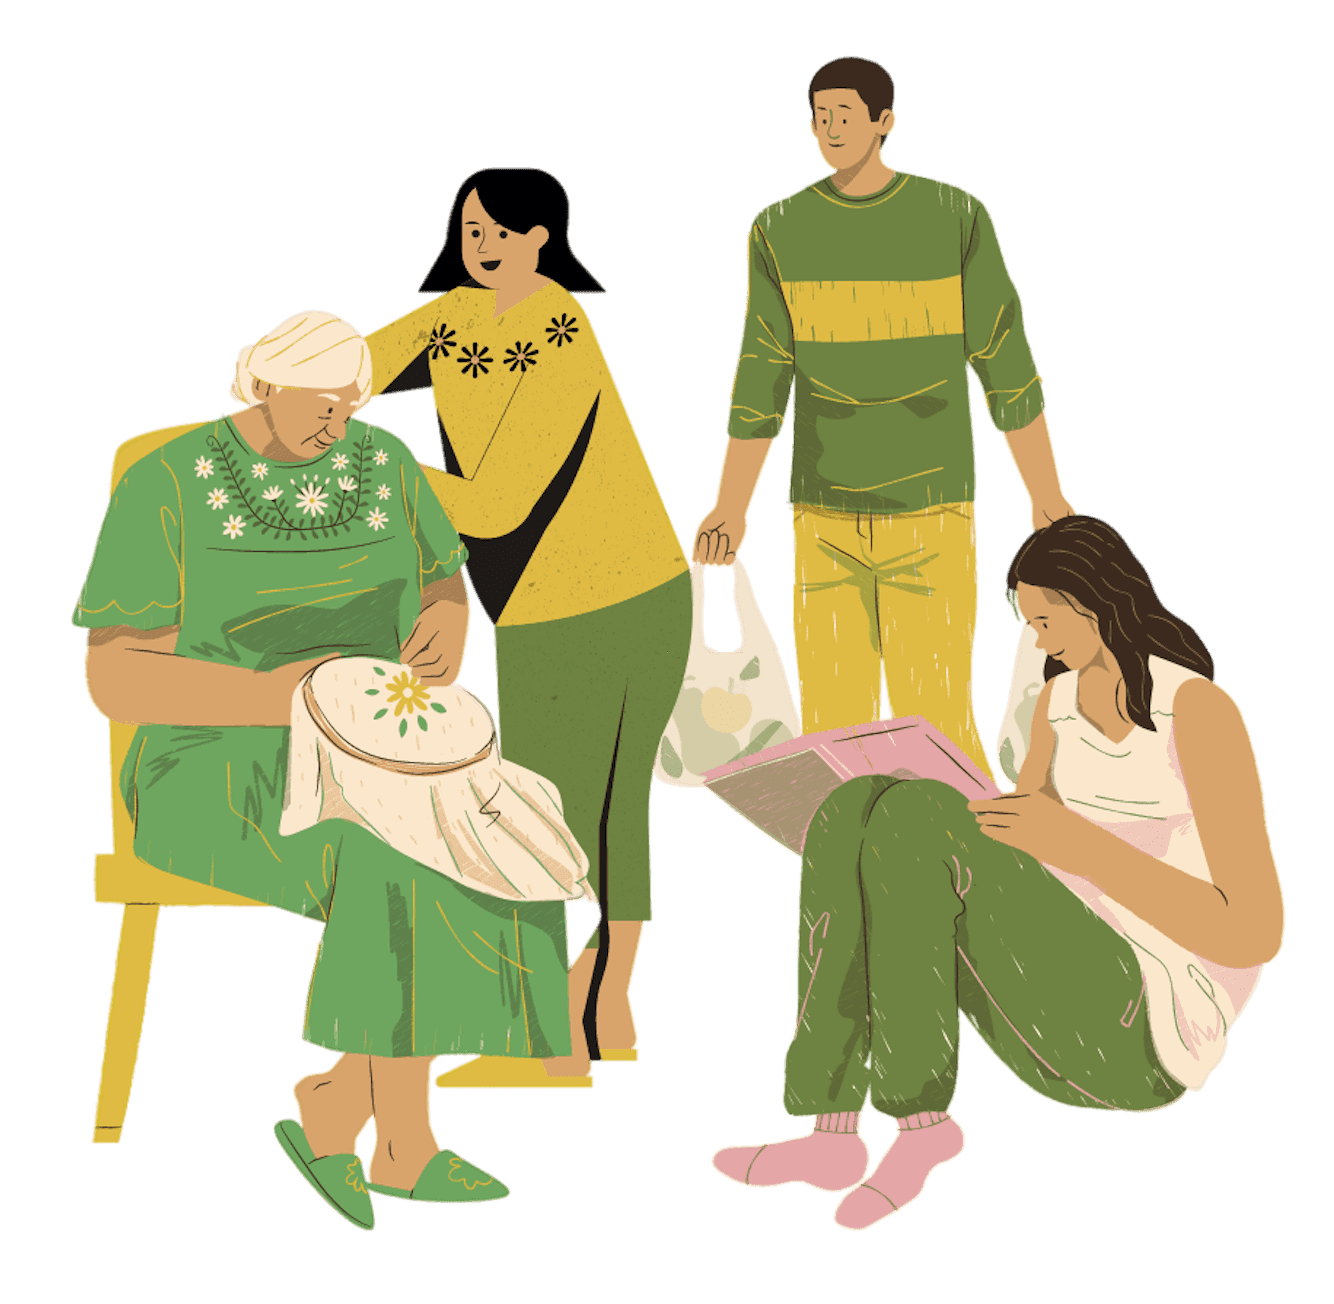 Cartoon portrayal of latin family. Grandma is working on embroidery. Daughter is reading. Mother is adjusting grandmother's chair. Son is bringing in groceries.